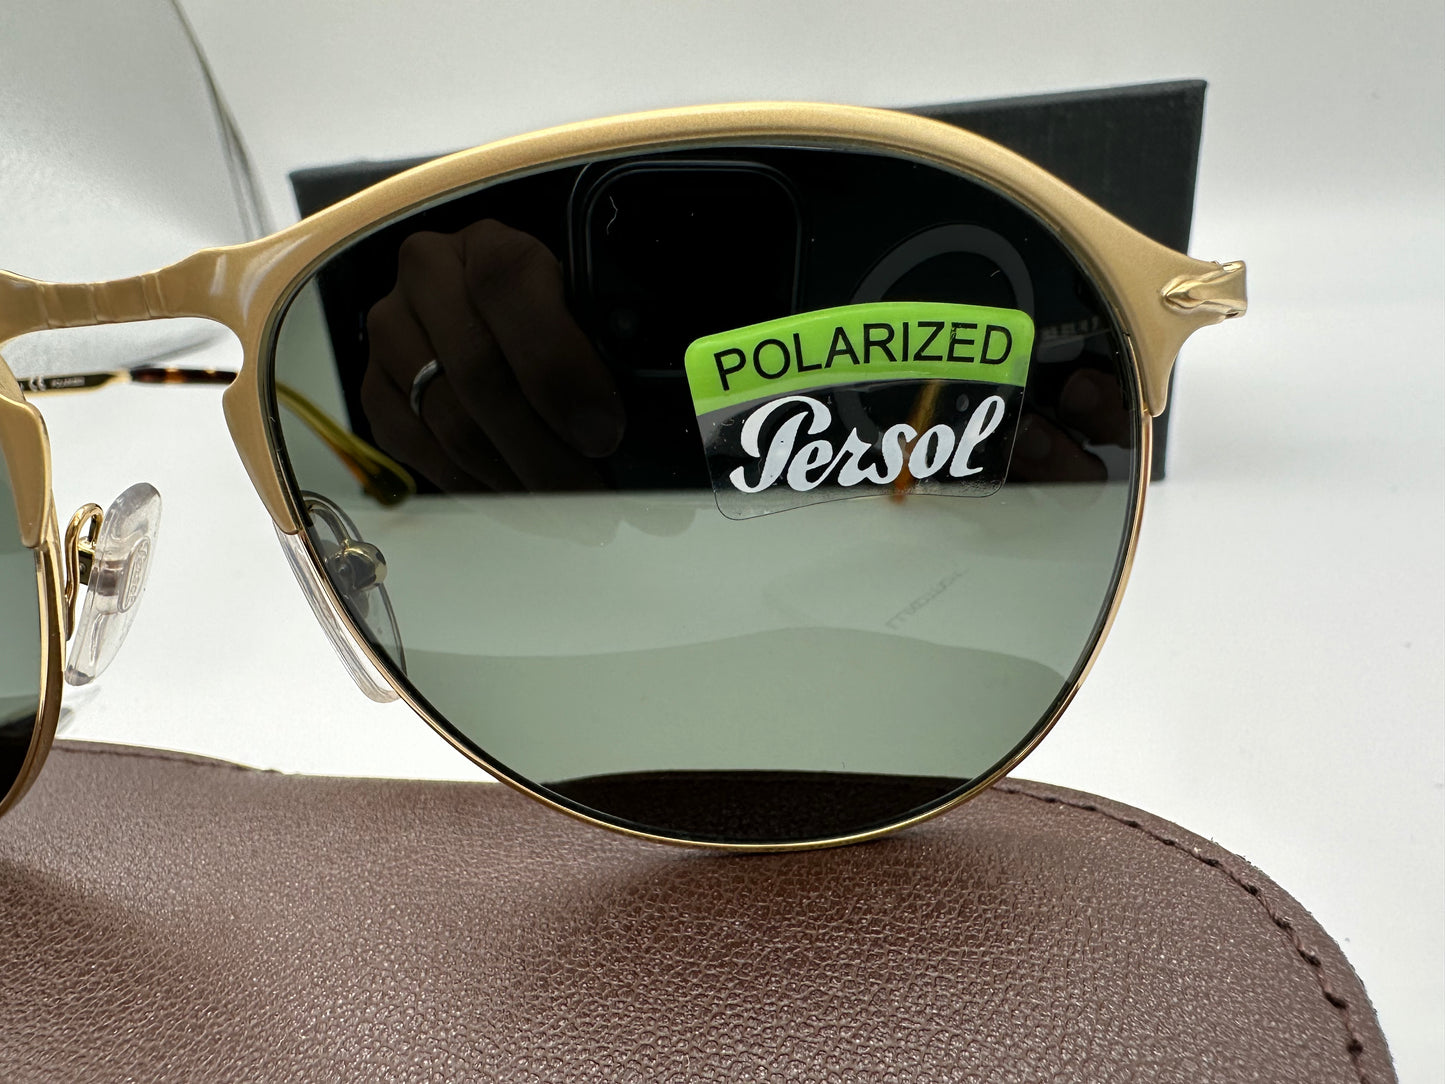 Persol 7649 S 56mm 1069/58 Gold Frame/Green Polarized Sunglasses Italy